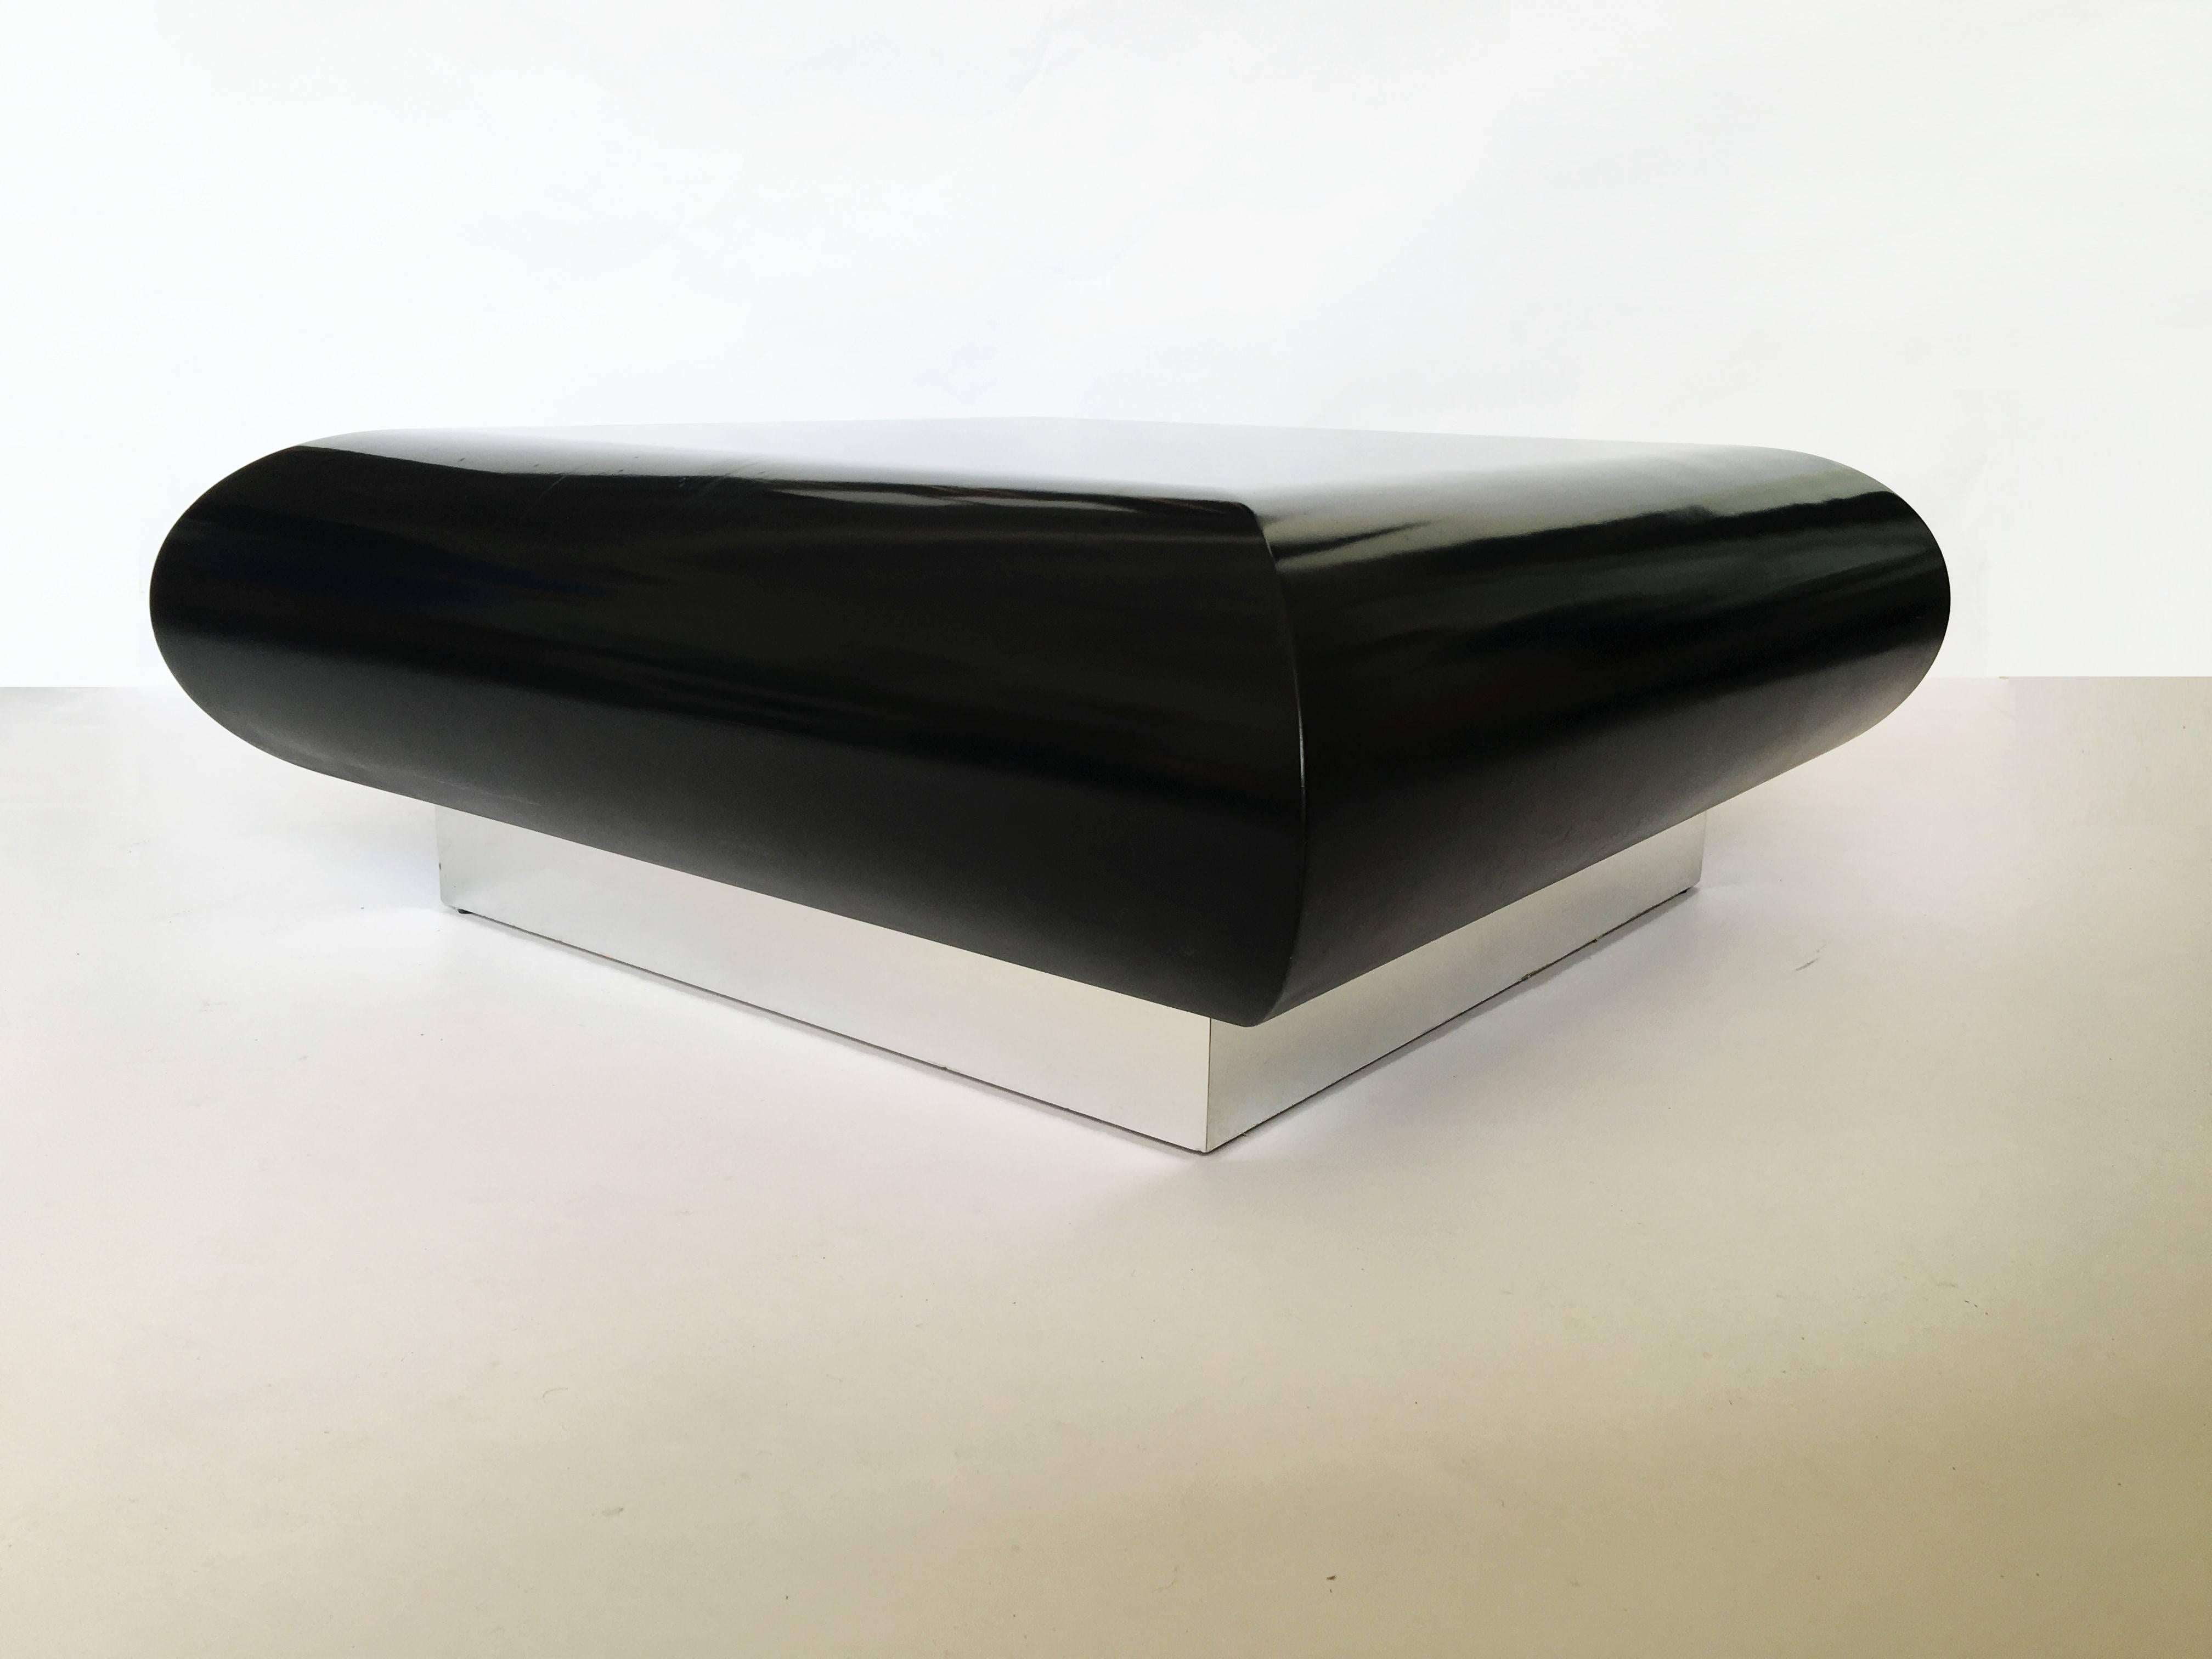 This glamorous coffee table features large black lacquer square shape with deeply curved edges resting on a chrome plinth base.
 